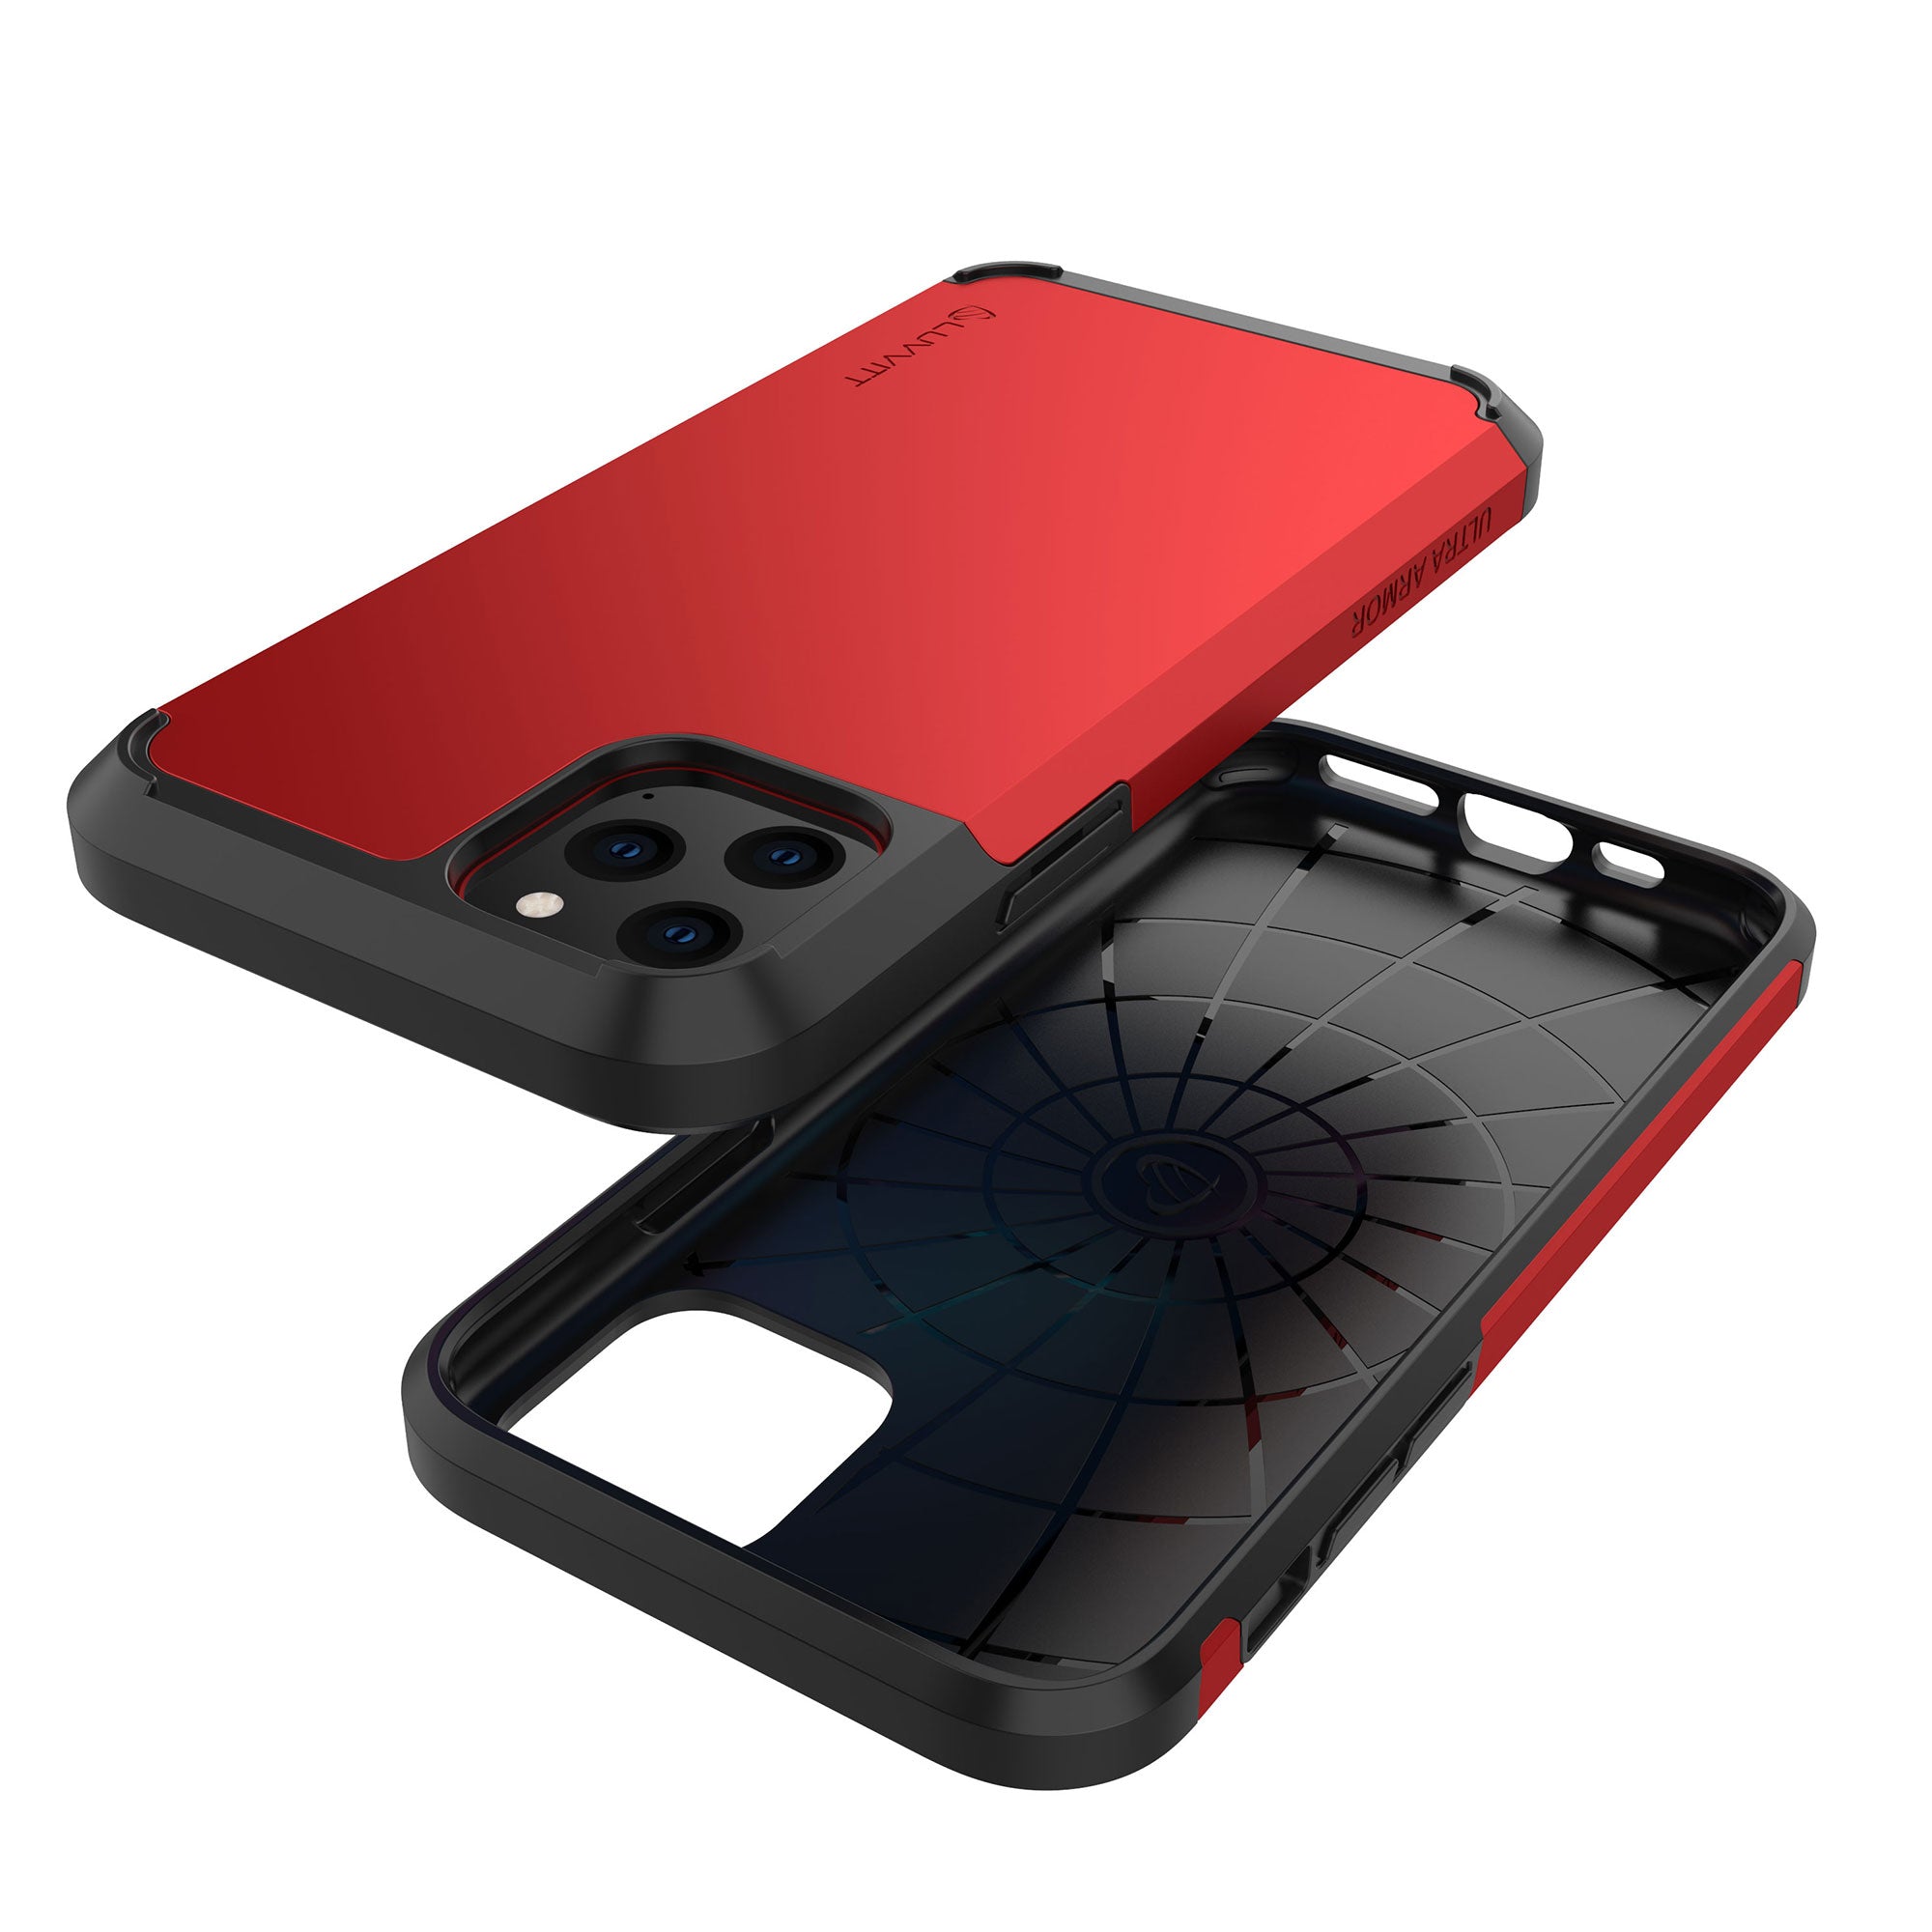 Luvvitt Ultra Armor Dual Layer Heavy Duty Case for iPhone 11 Pro Max 2019 - Red